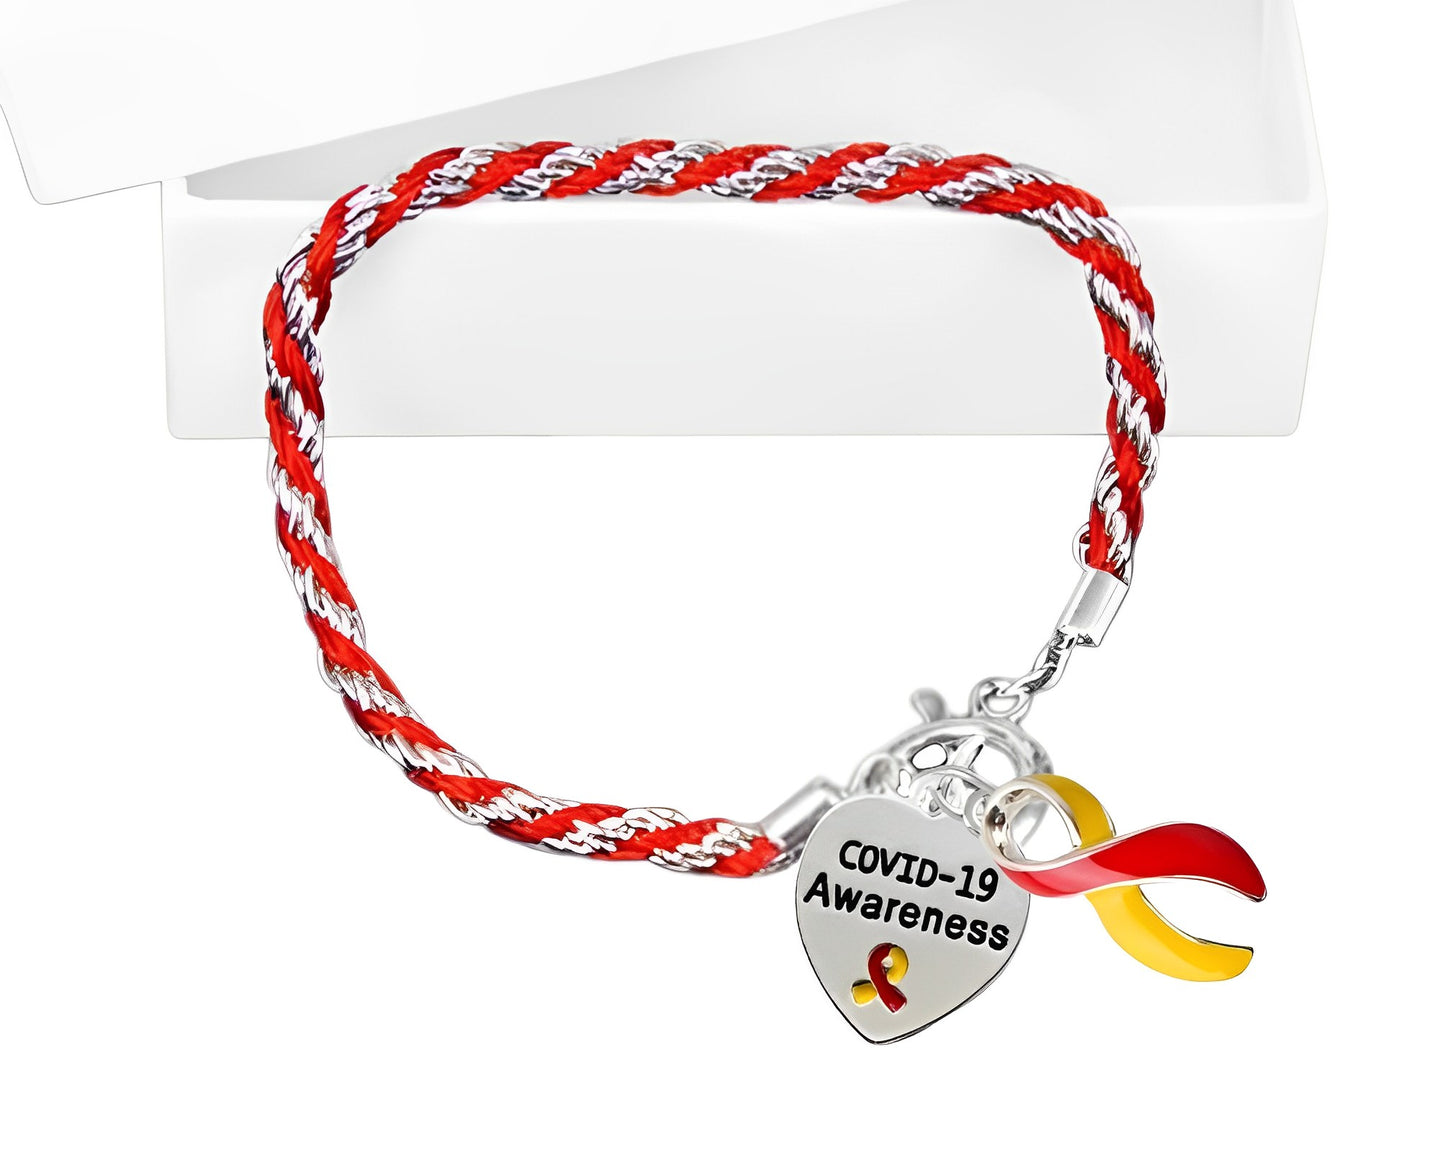 12 Coronavirus (COVID-19) Awareness Rope-Style Bracelets - Fundraising For A Cause